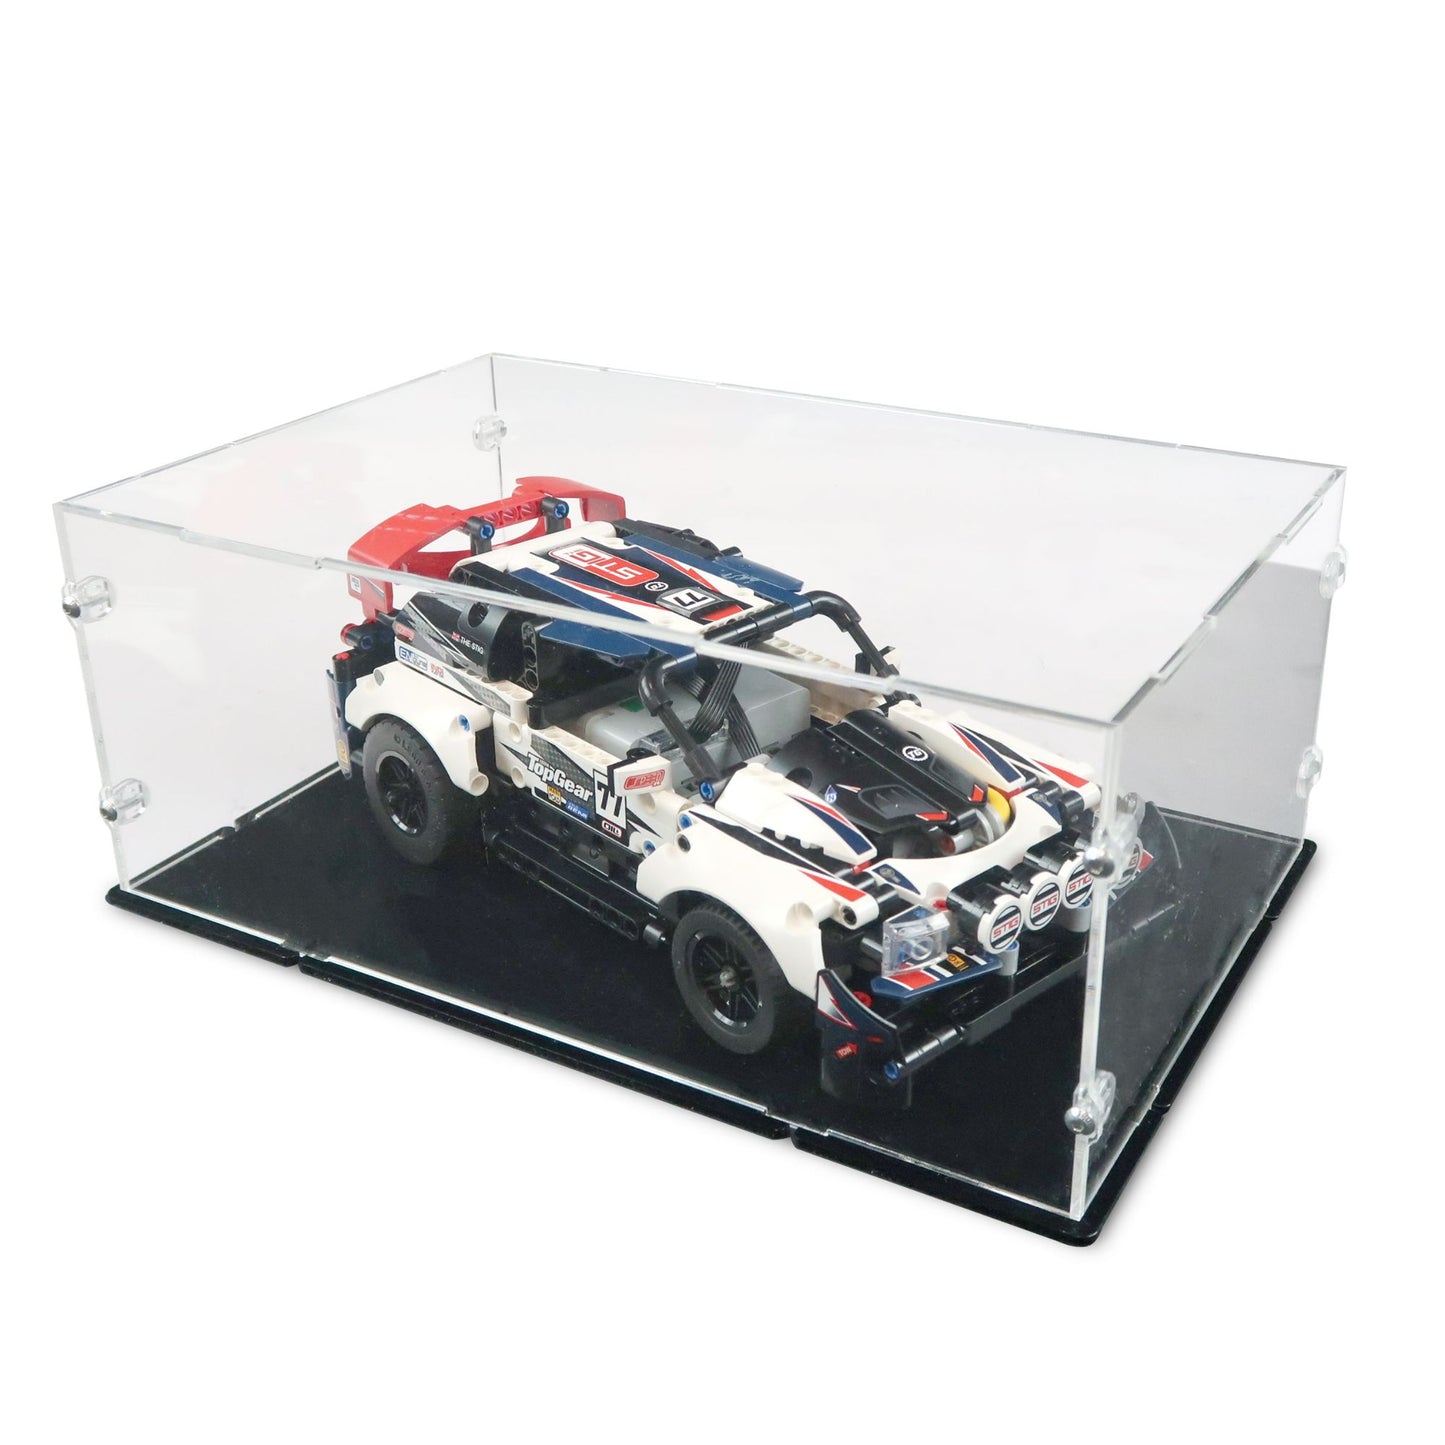 42109 App-Controlled Top Gear Rally Car Display Case